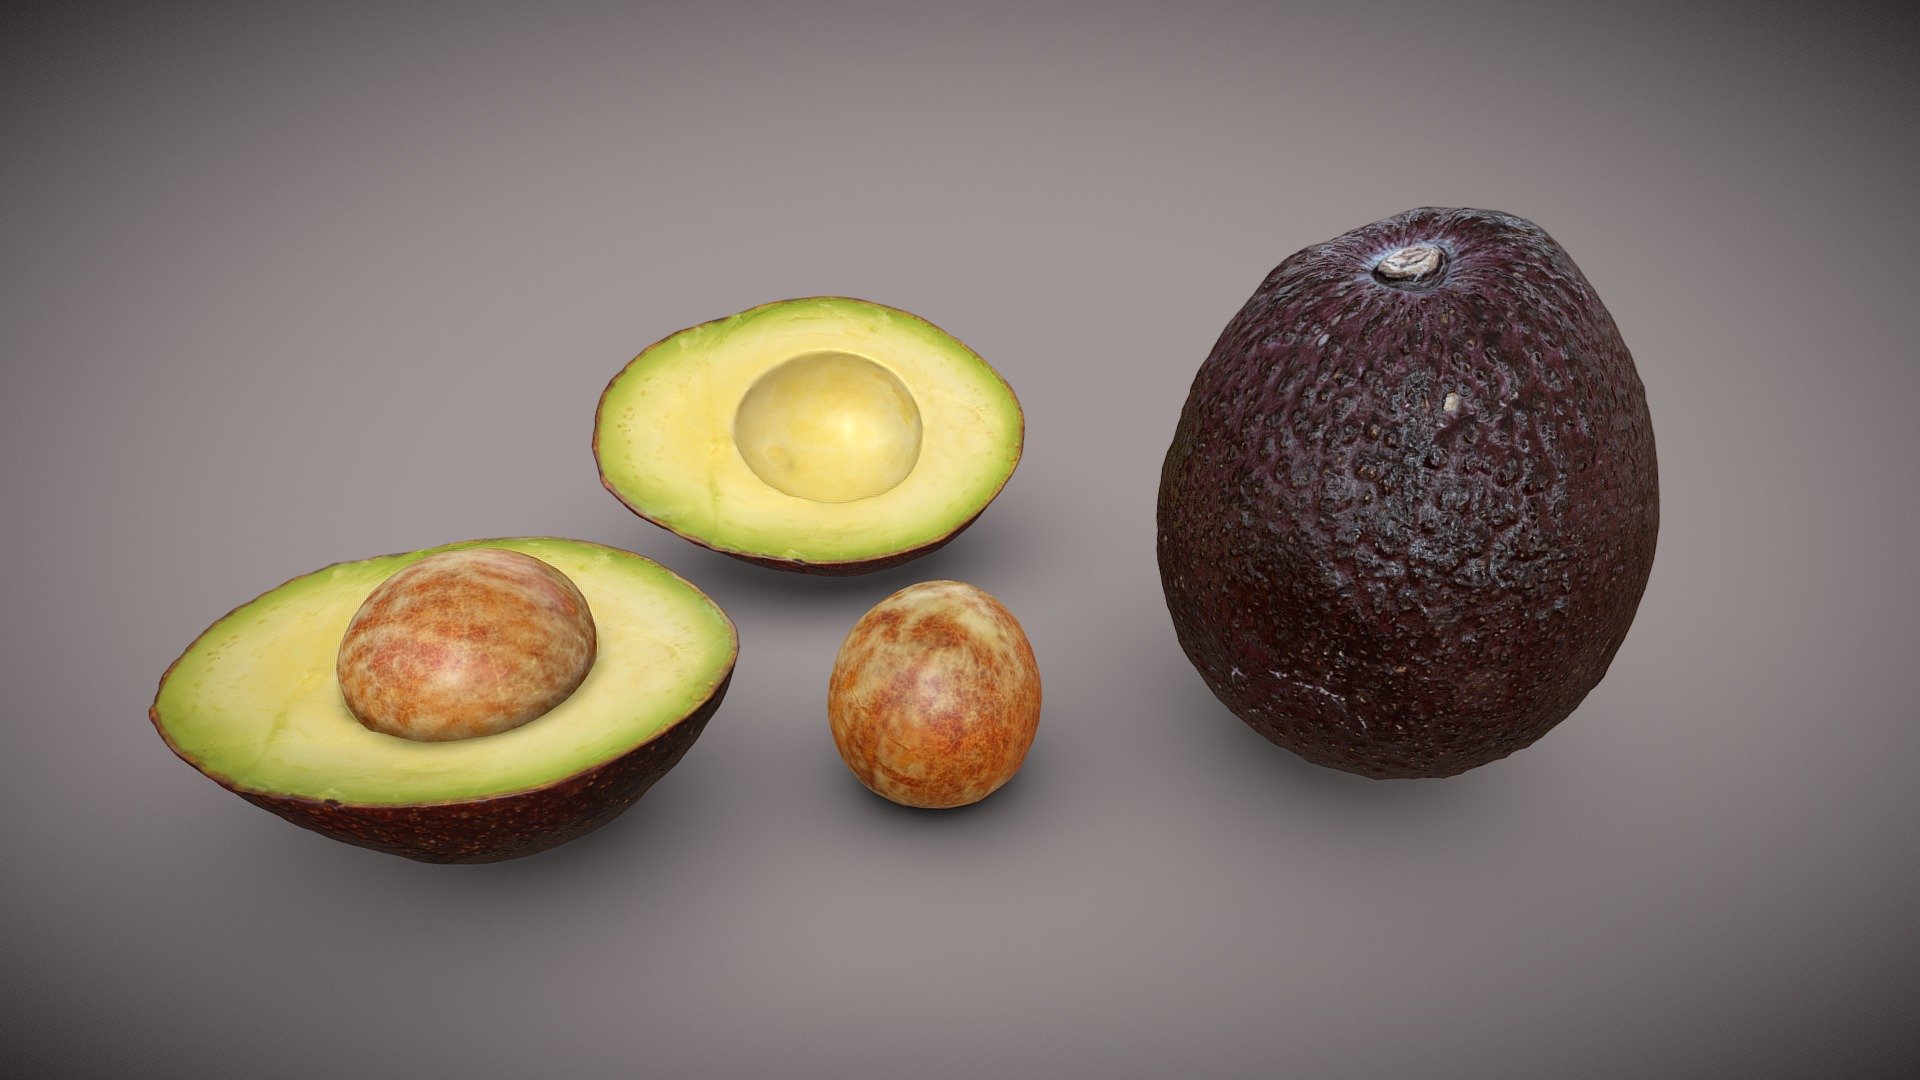 Contains 3 different meshes:




1 Avocado

1 Half Avocado

1 Avocado Seed

2 Materials, 2K textures (Diffuse, Roughness, Normal)

Please dowload the additionnal zip file to get access to the separated fbx mesh

Made with Metashape, Blender and Subtance painter

Photos taken with a “Sony A7II + 105mm f/2.8 DG DN Macro Art